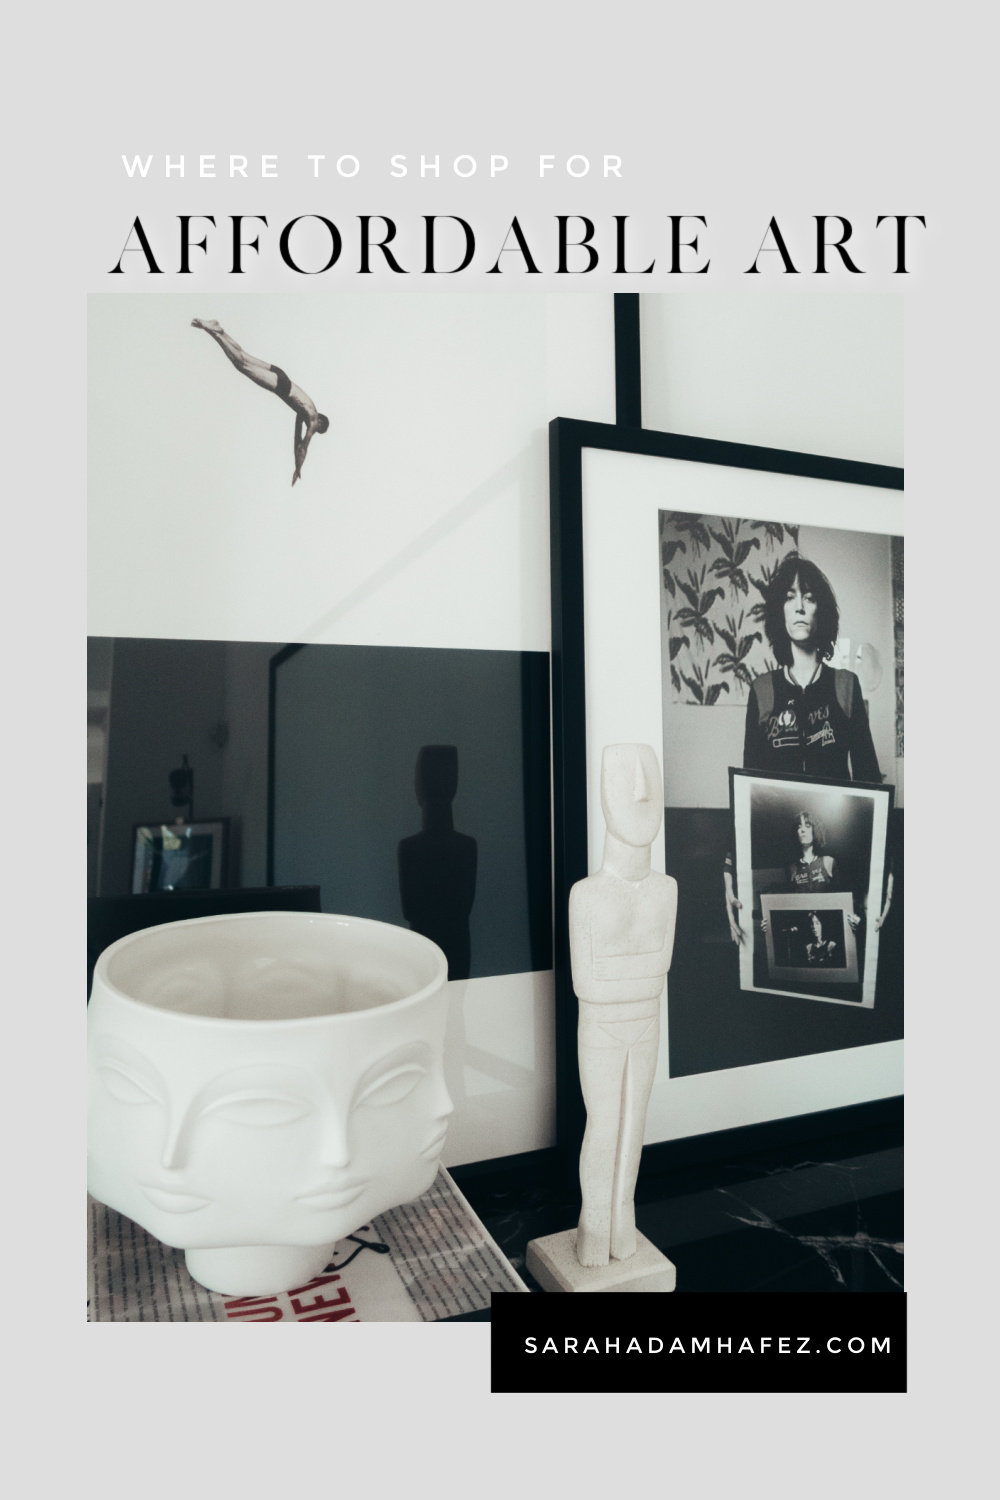 affordable art, affordable art prints, affordable art for the home, affordable art work